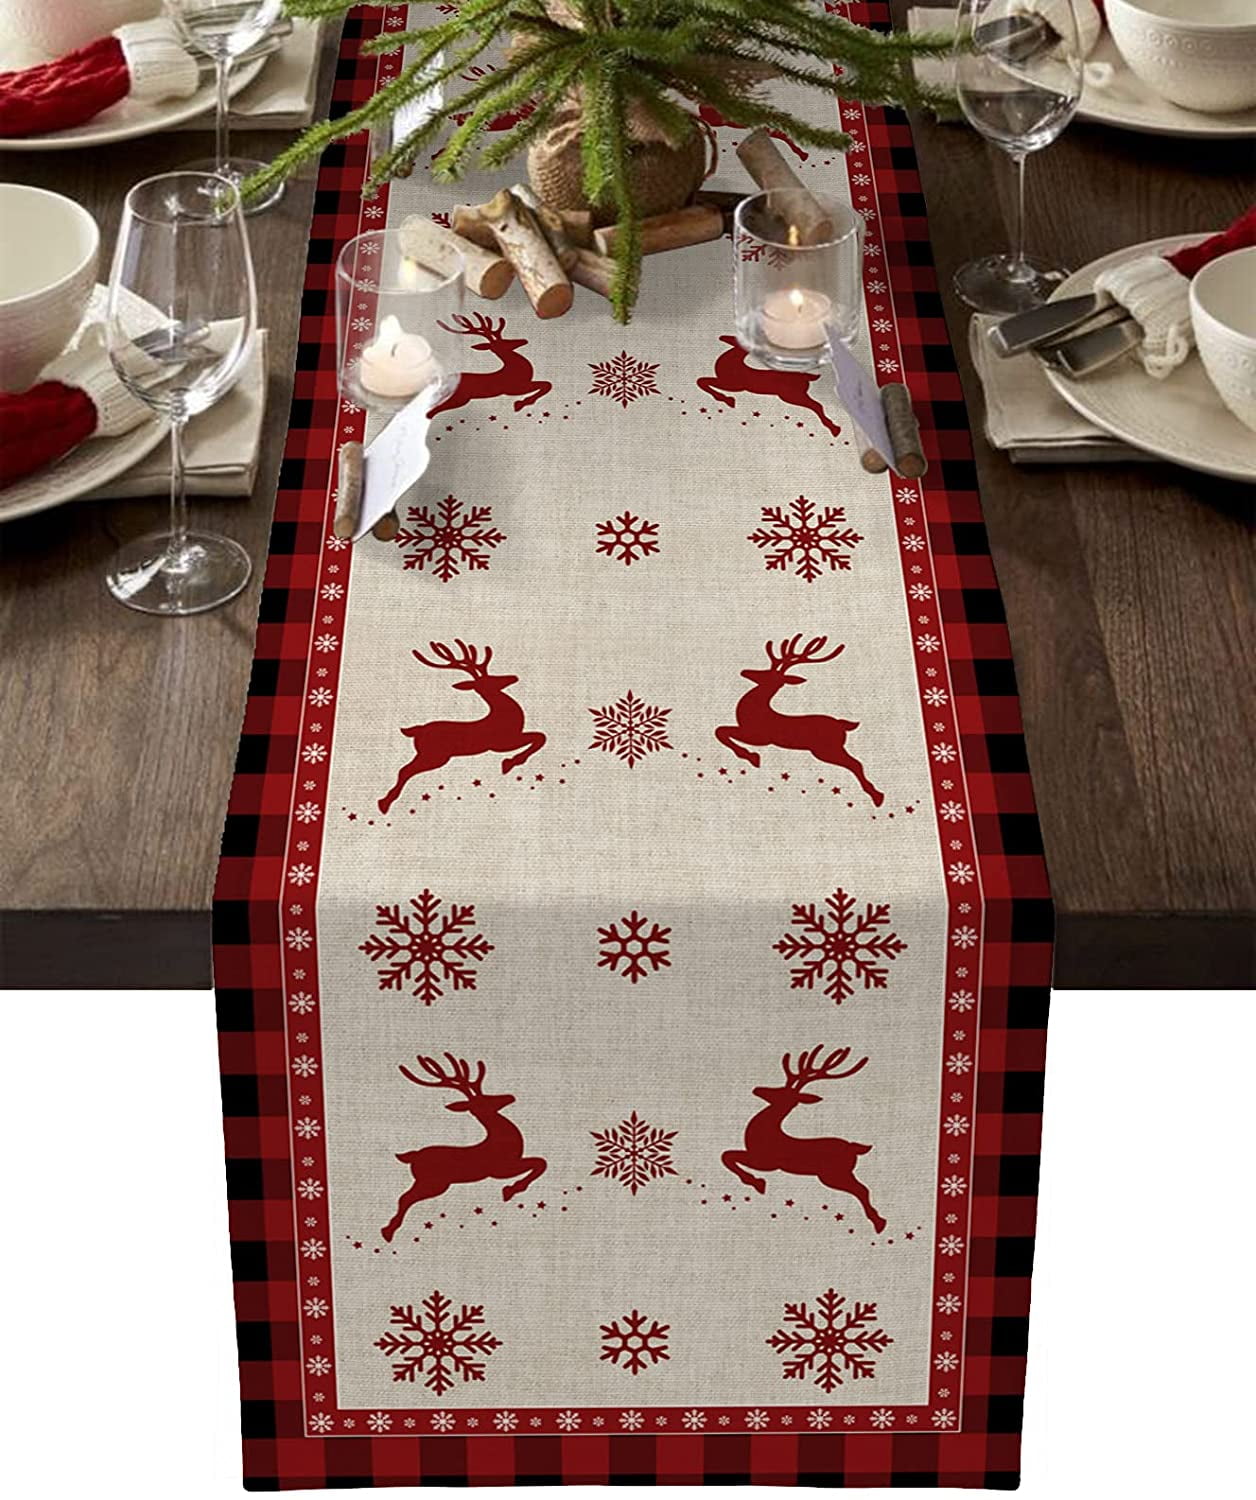 Red Star Christmas Table runner Doily Tablecloth with Openwork Embroidery Winter 